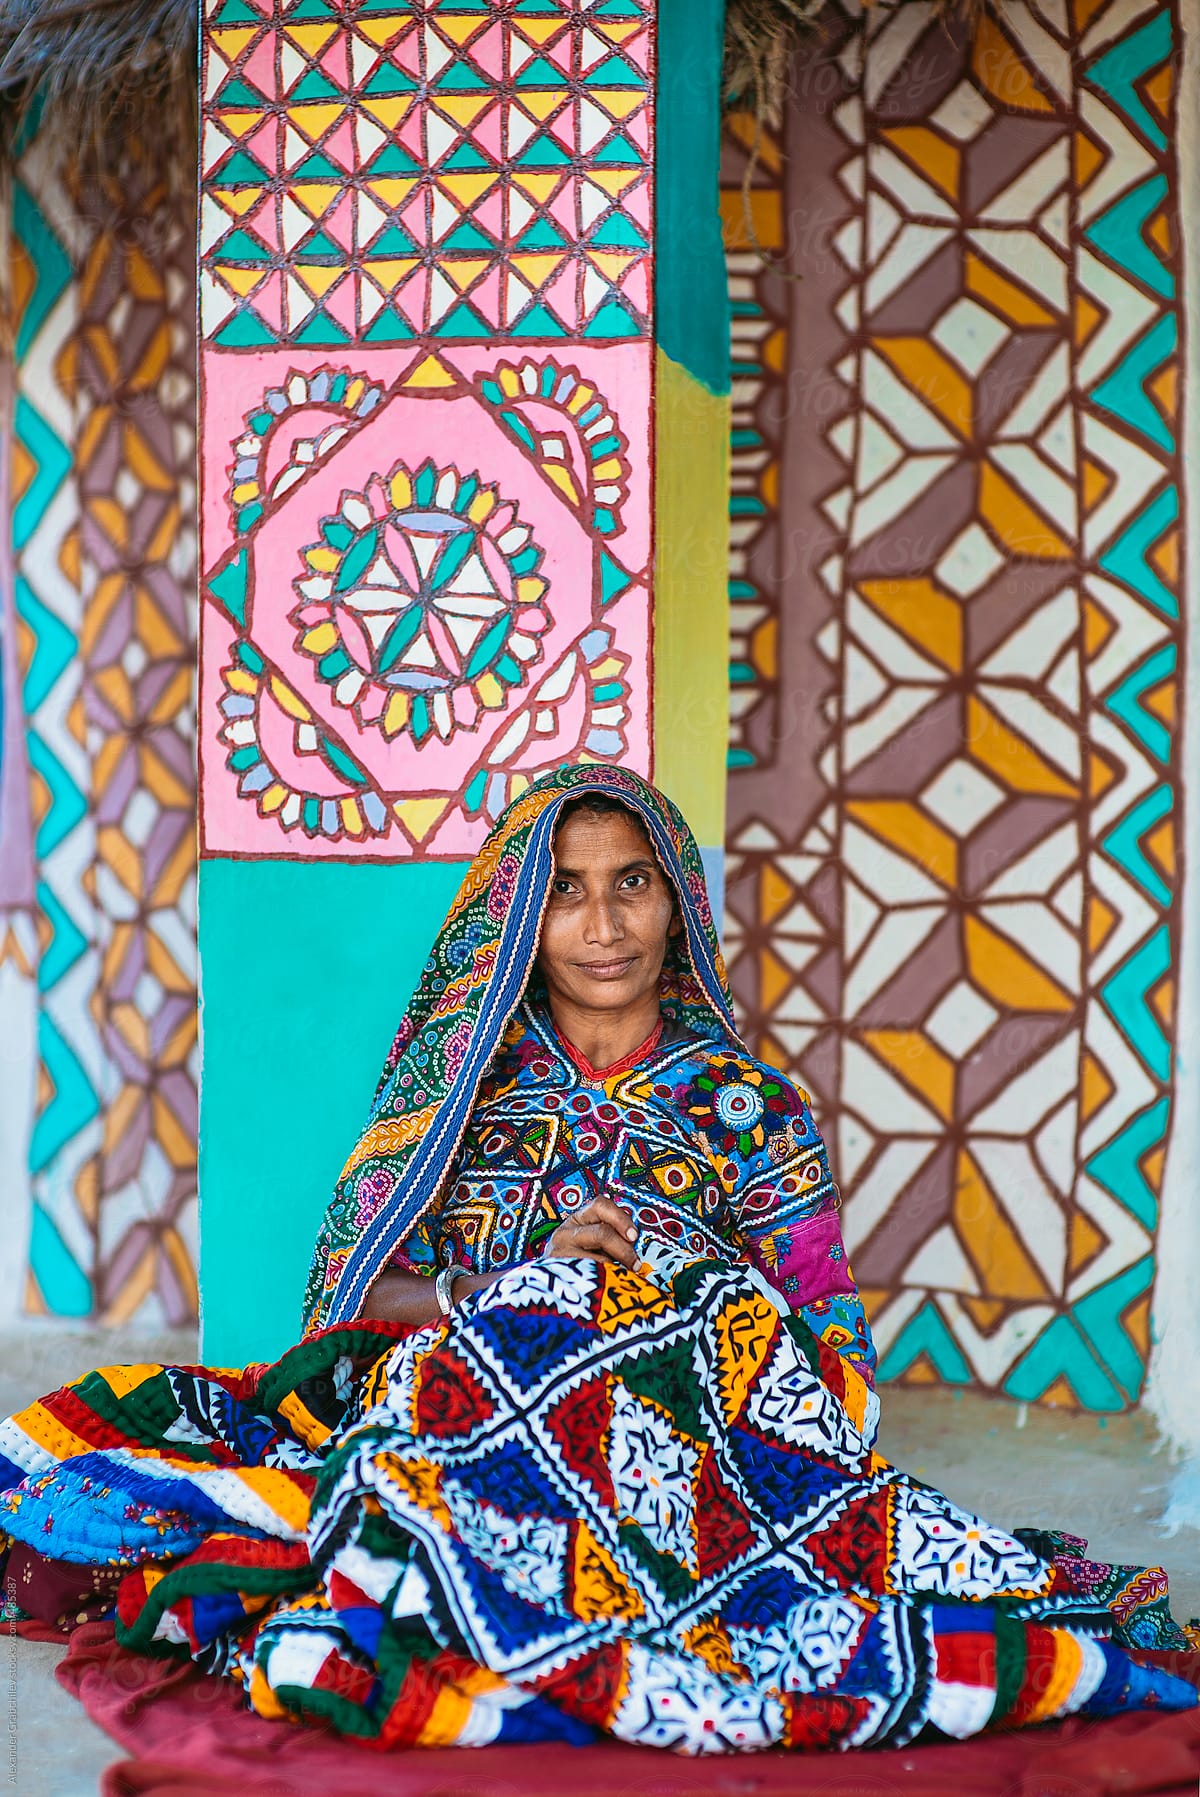 Meghwal Woman Embroidering Fabric Outside House.